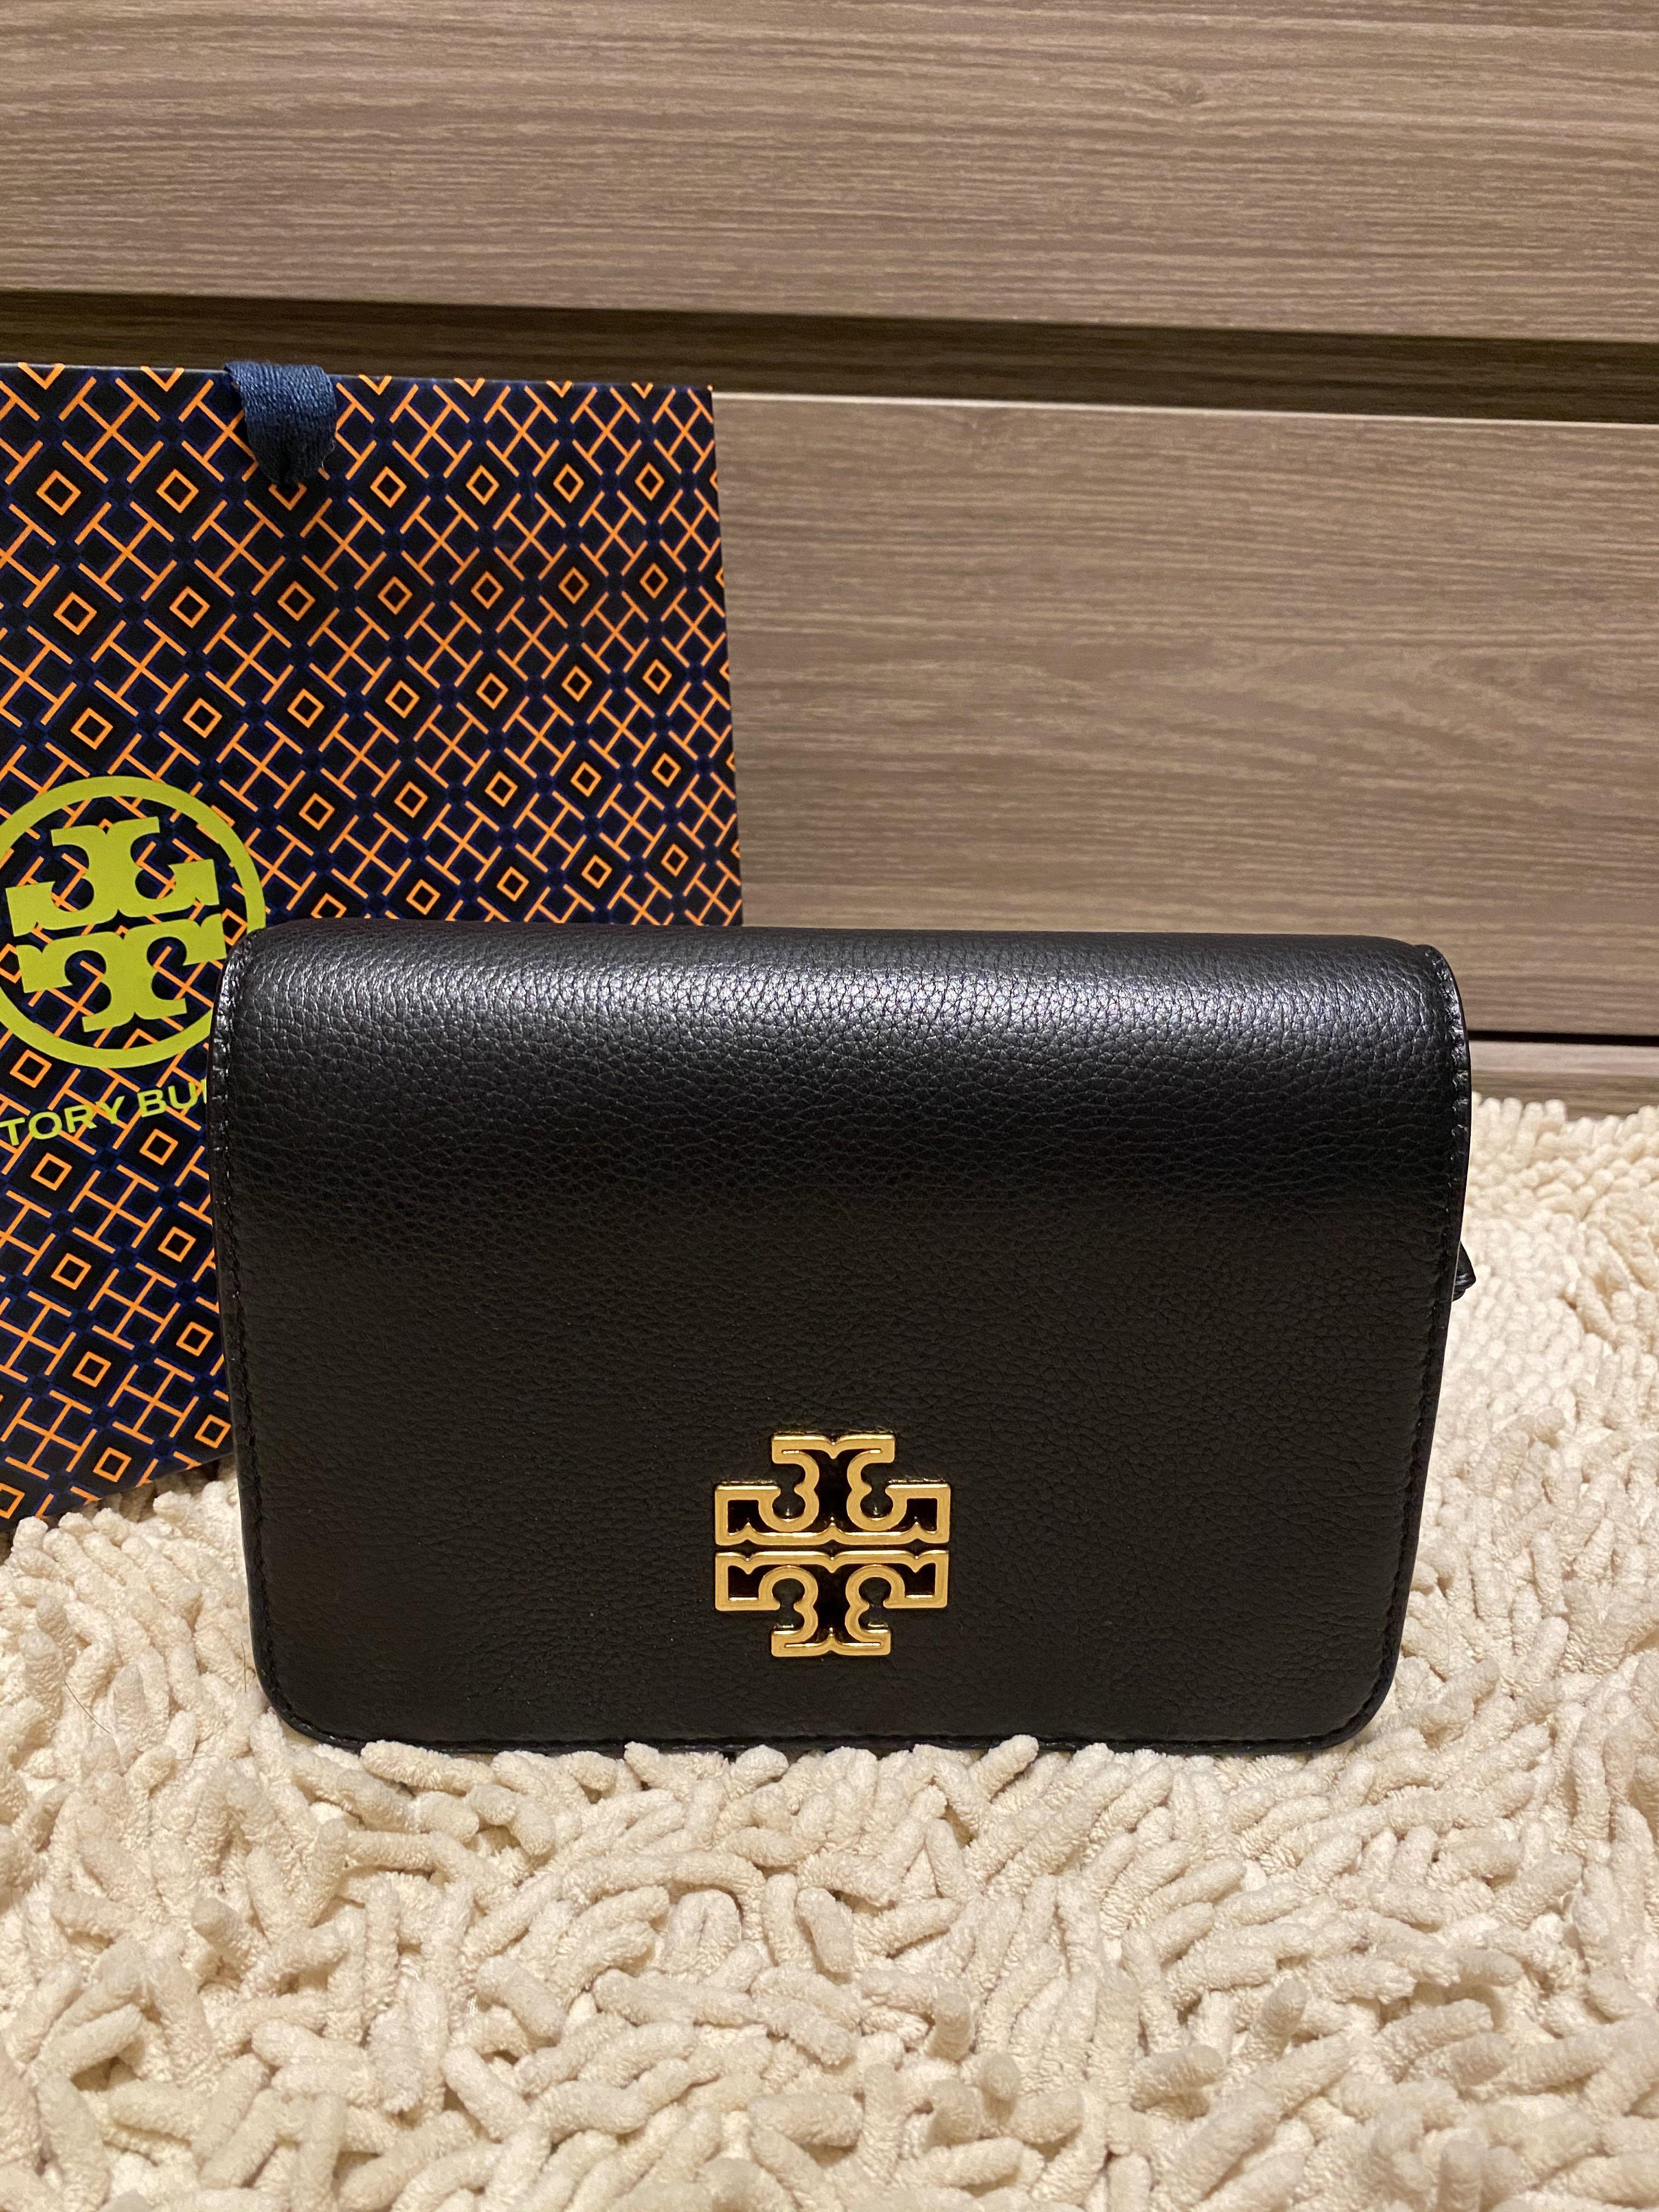 Authentic Tory Burch Britten Combo Crossbody / clutch (black with gold  hardware), Women's Fashion, Bags & Wallets, Cross-body Bags on Carousell